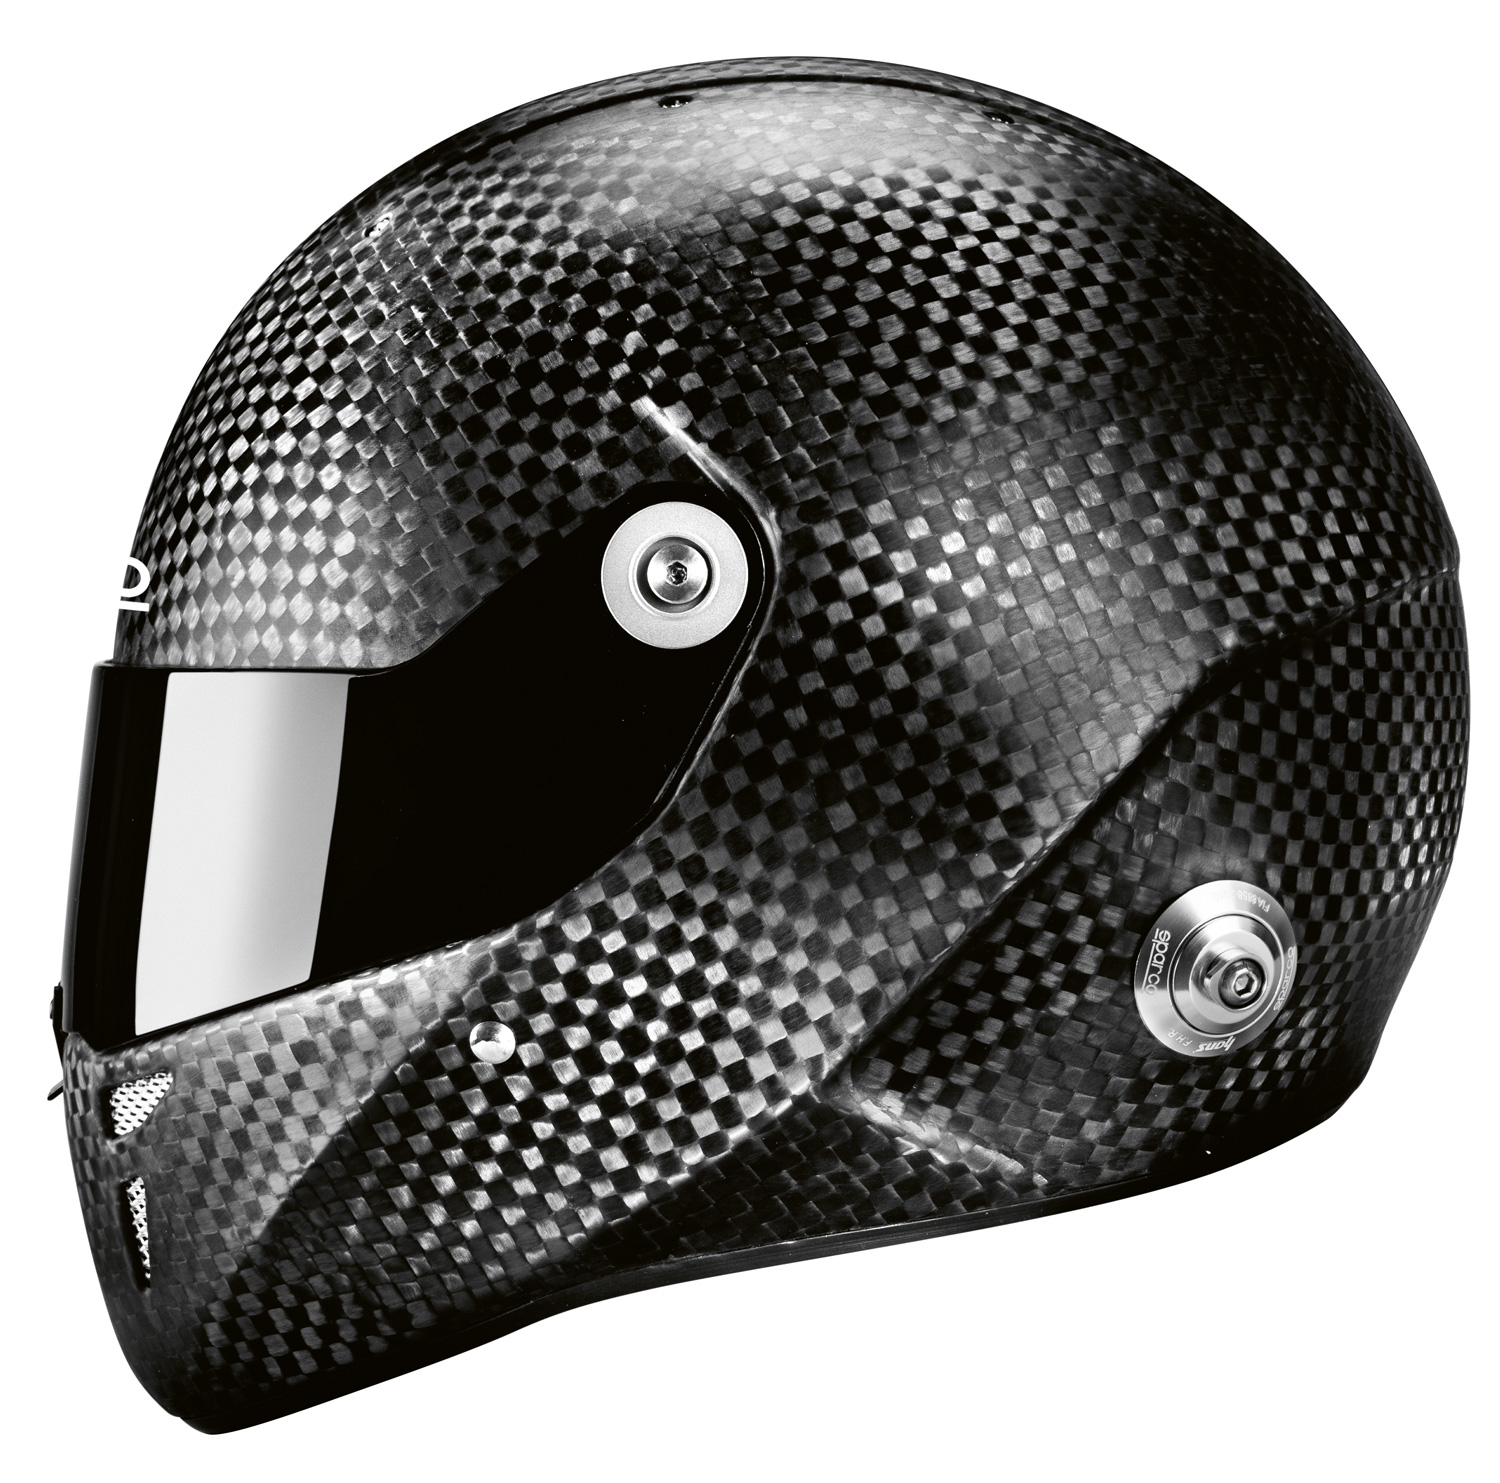 Sparco Helm Prime 8860